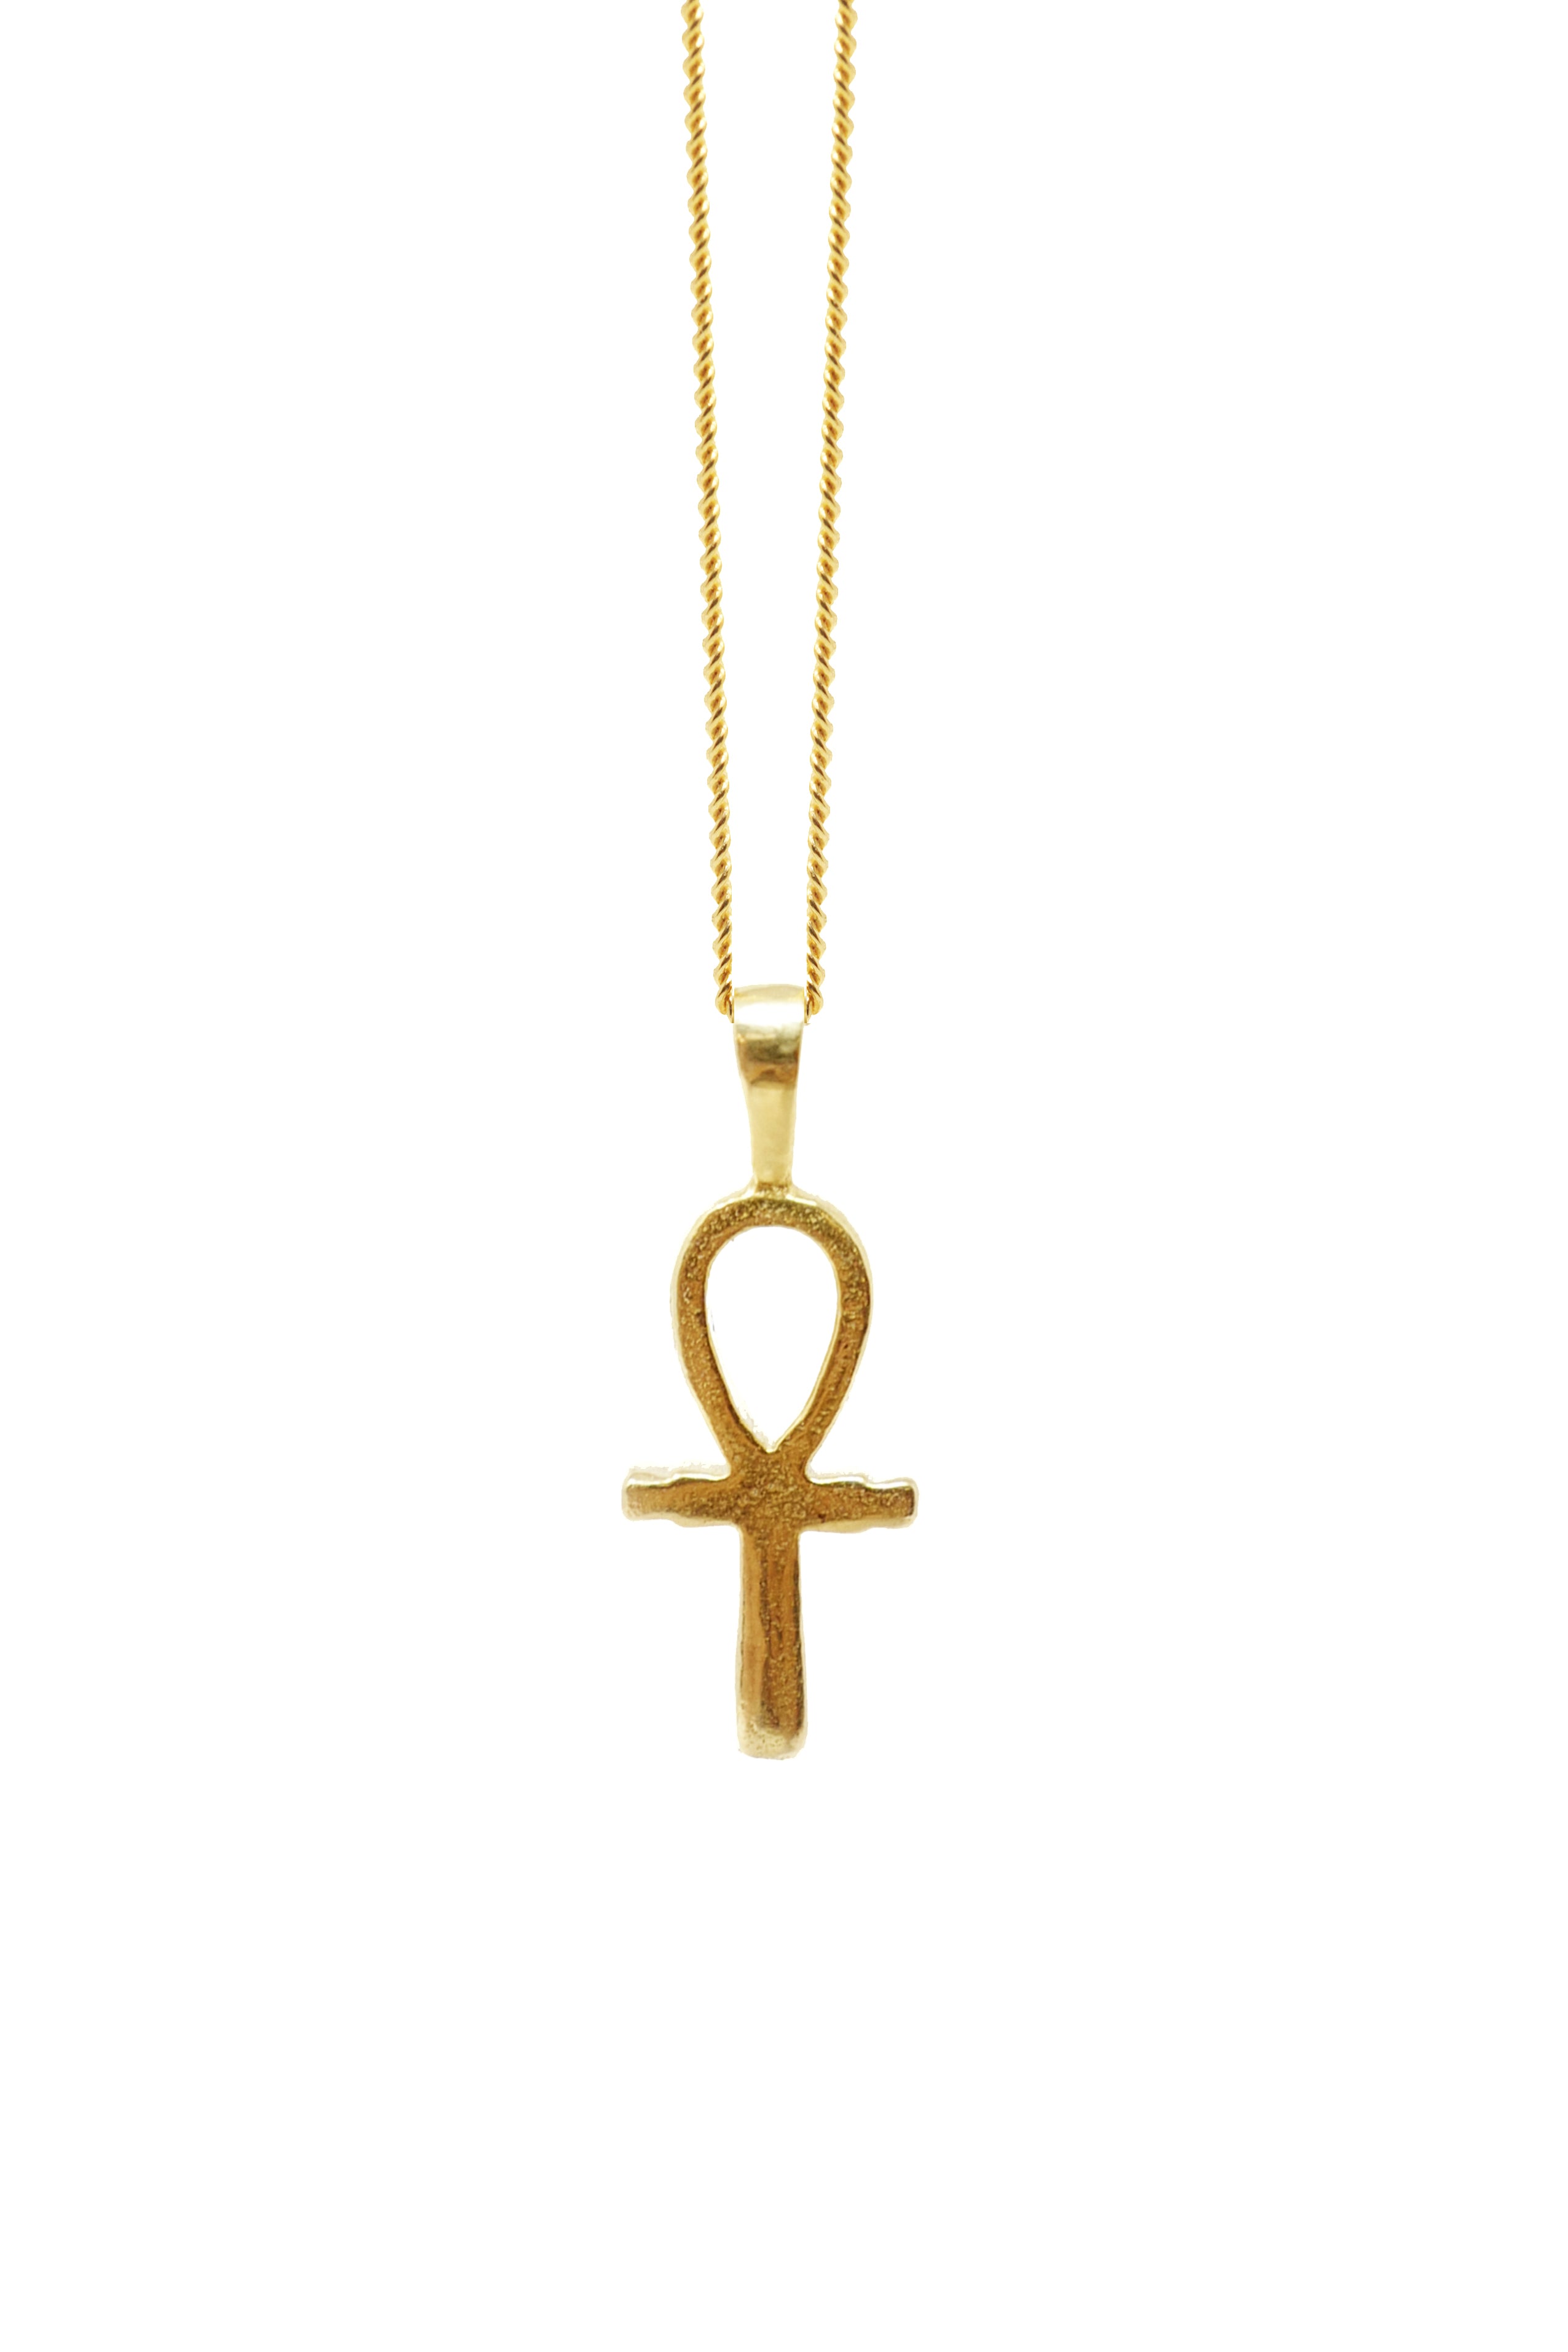 ANKH Necklace – omiwoods